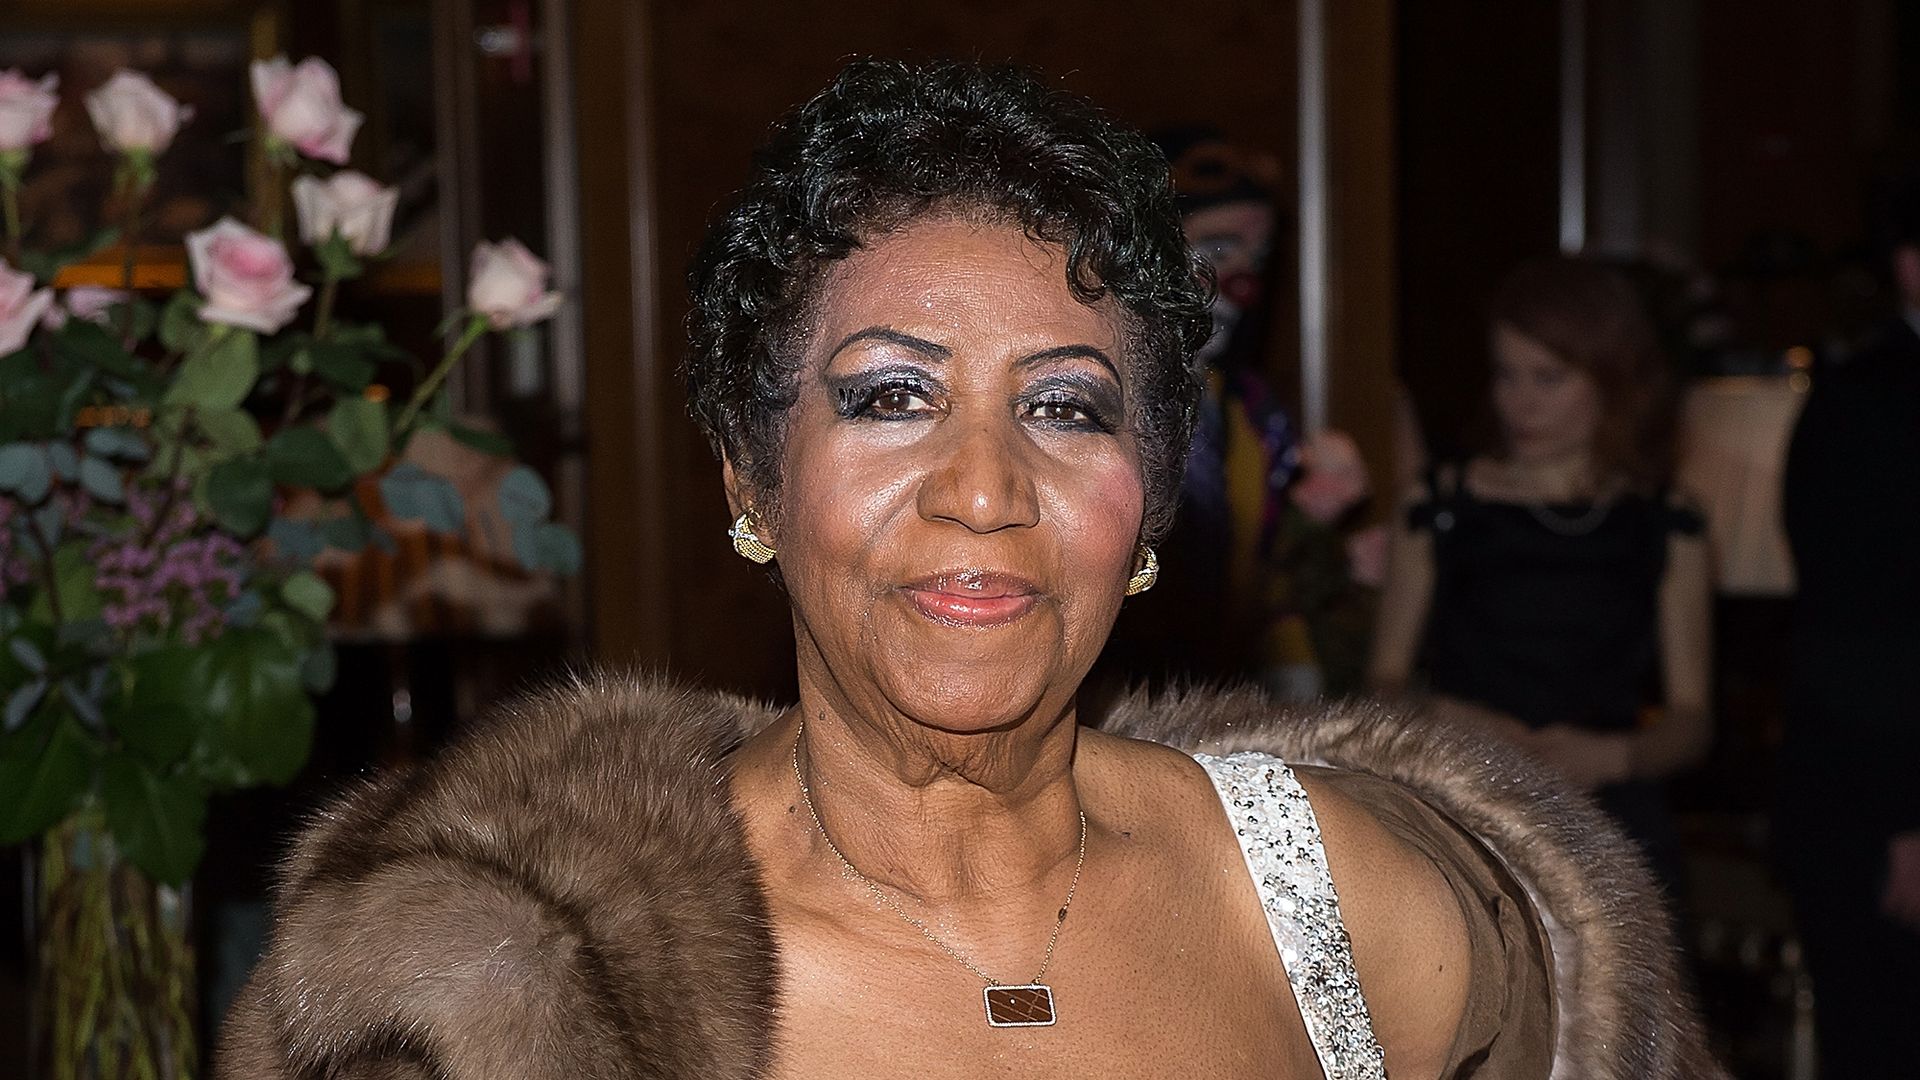 Aretha Franklin attends her birthday celebration at the Ritz Carlton Hotel on March 22, 2015 in New York City